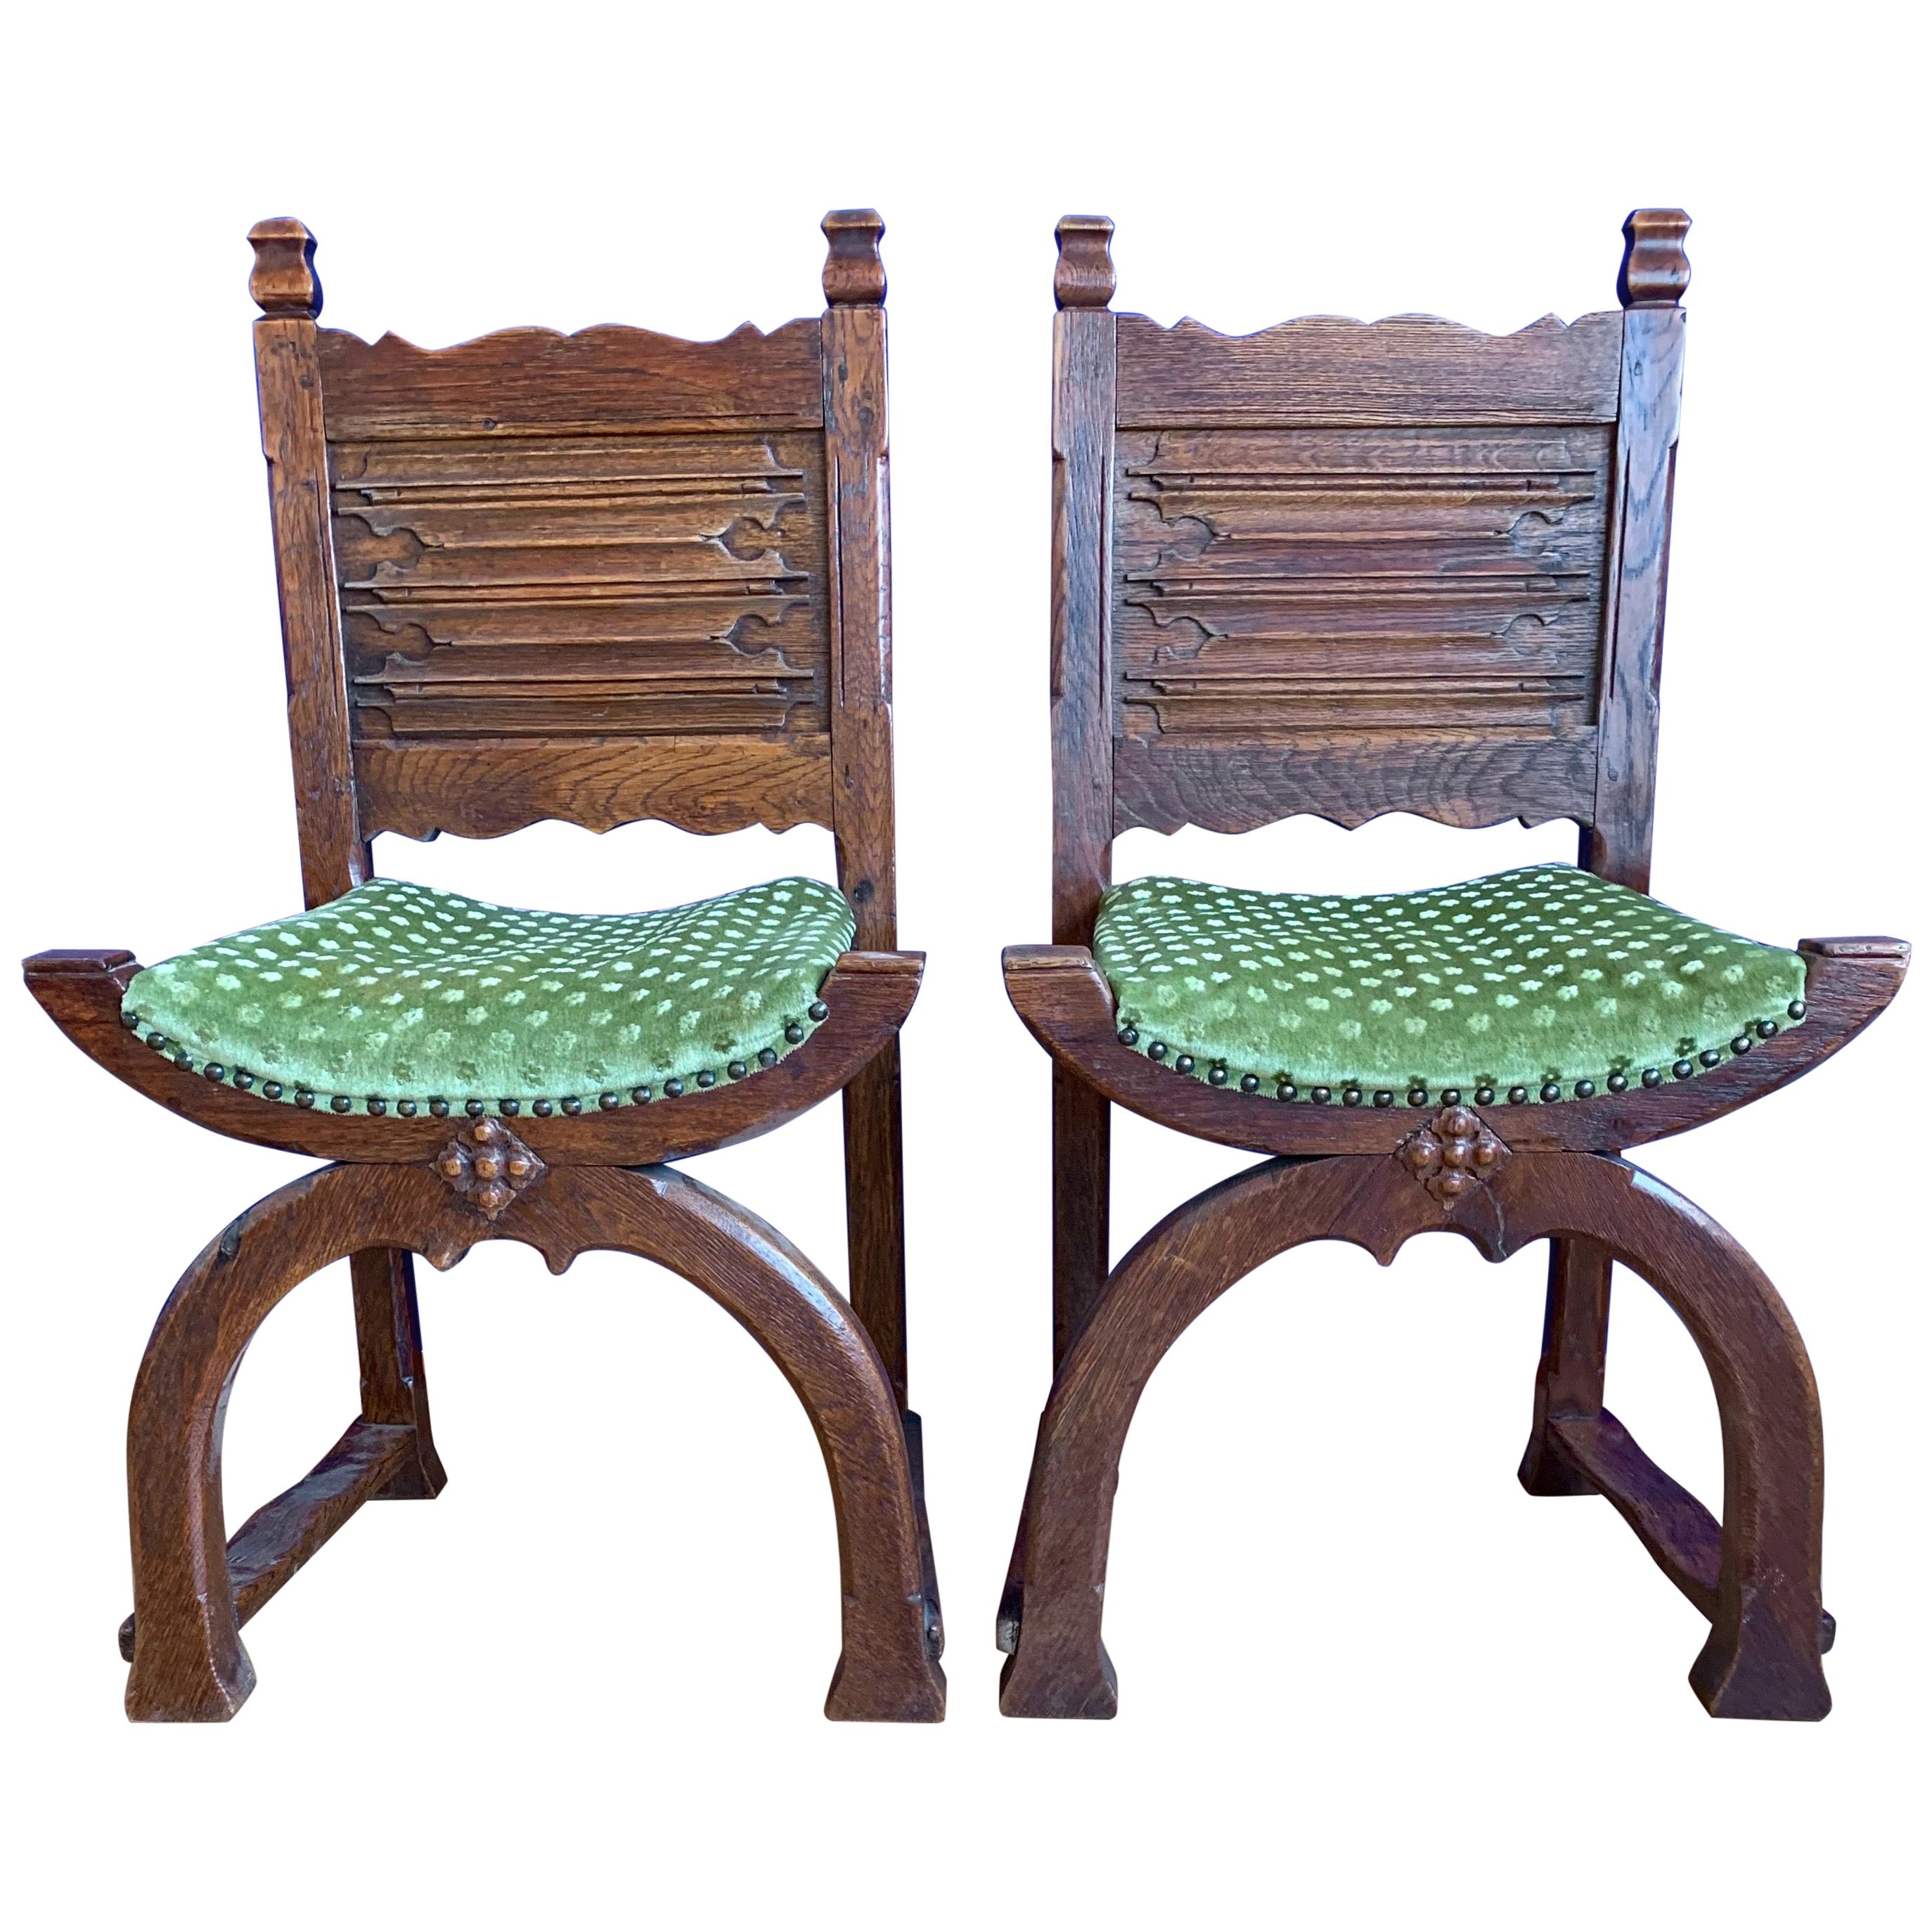 Rare Antique Pair of Gothic Revival and Medieval Style Cloister or Church Chairs